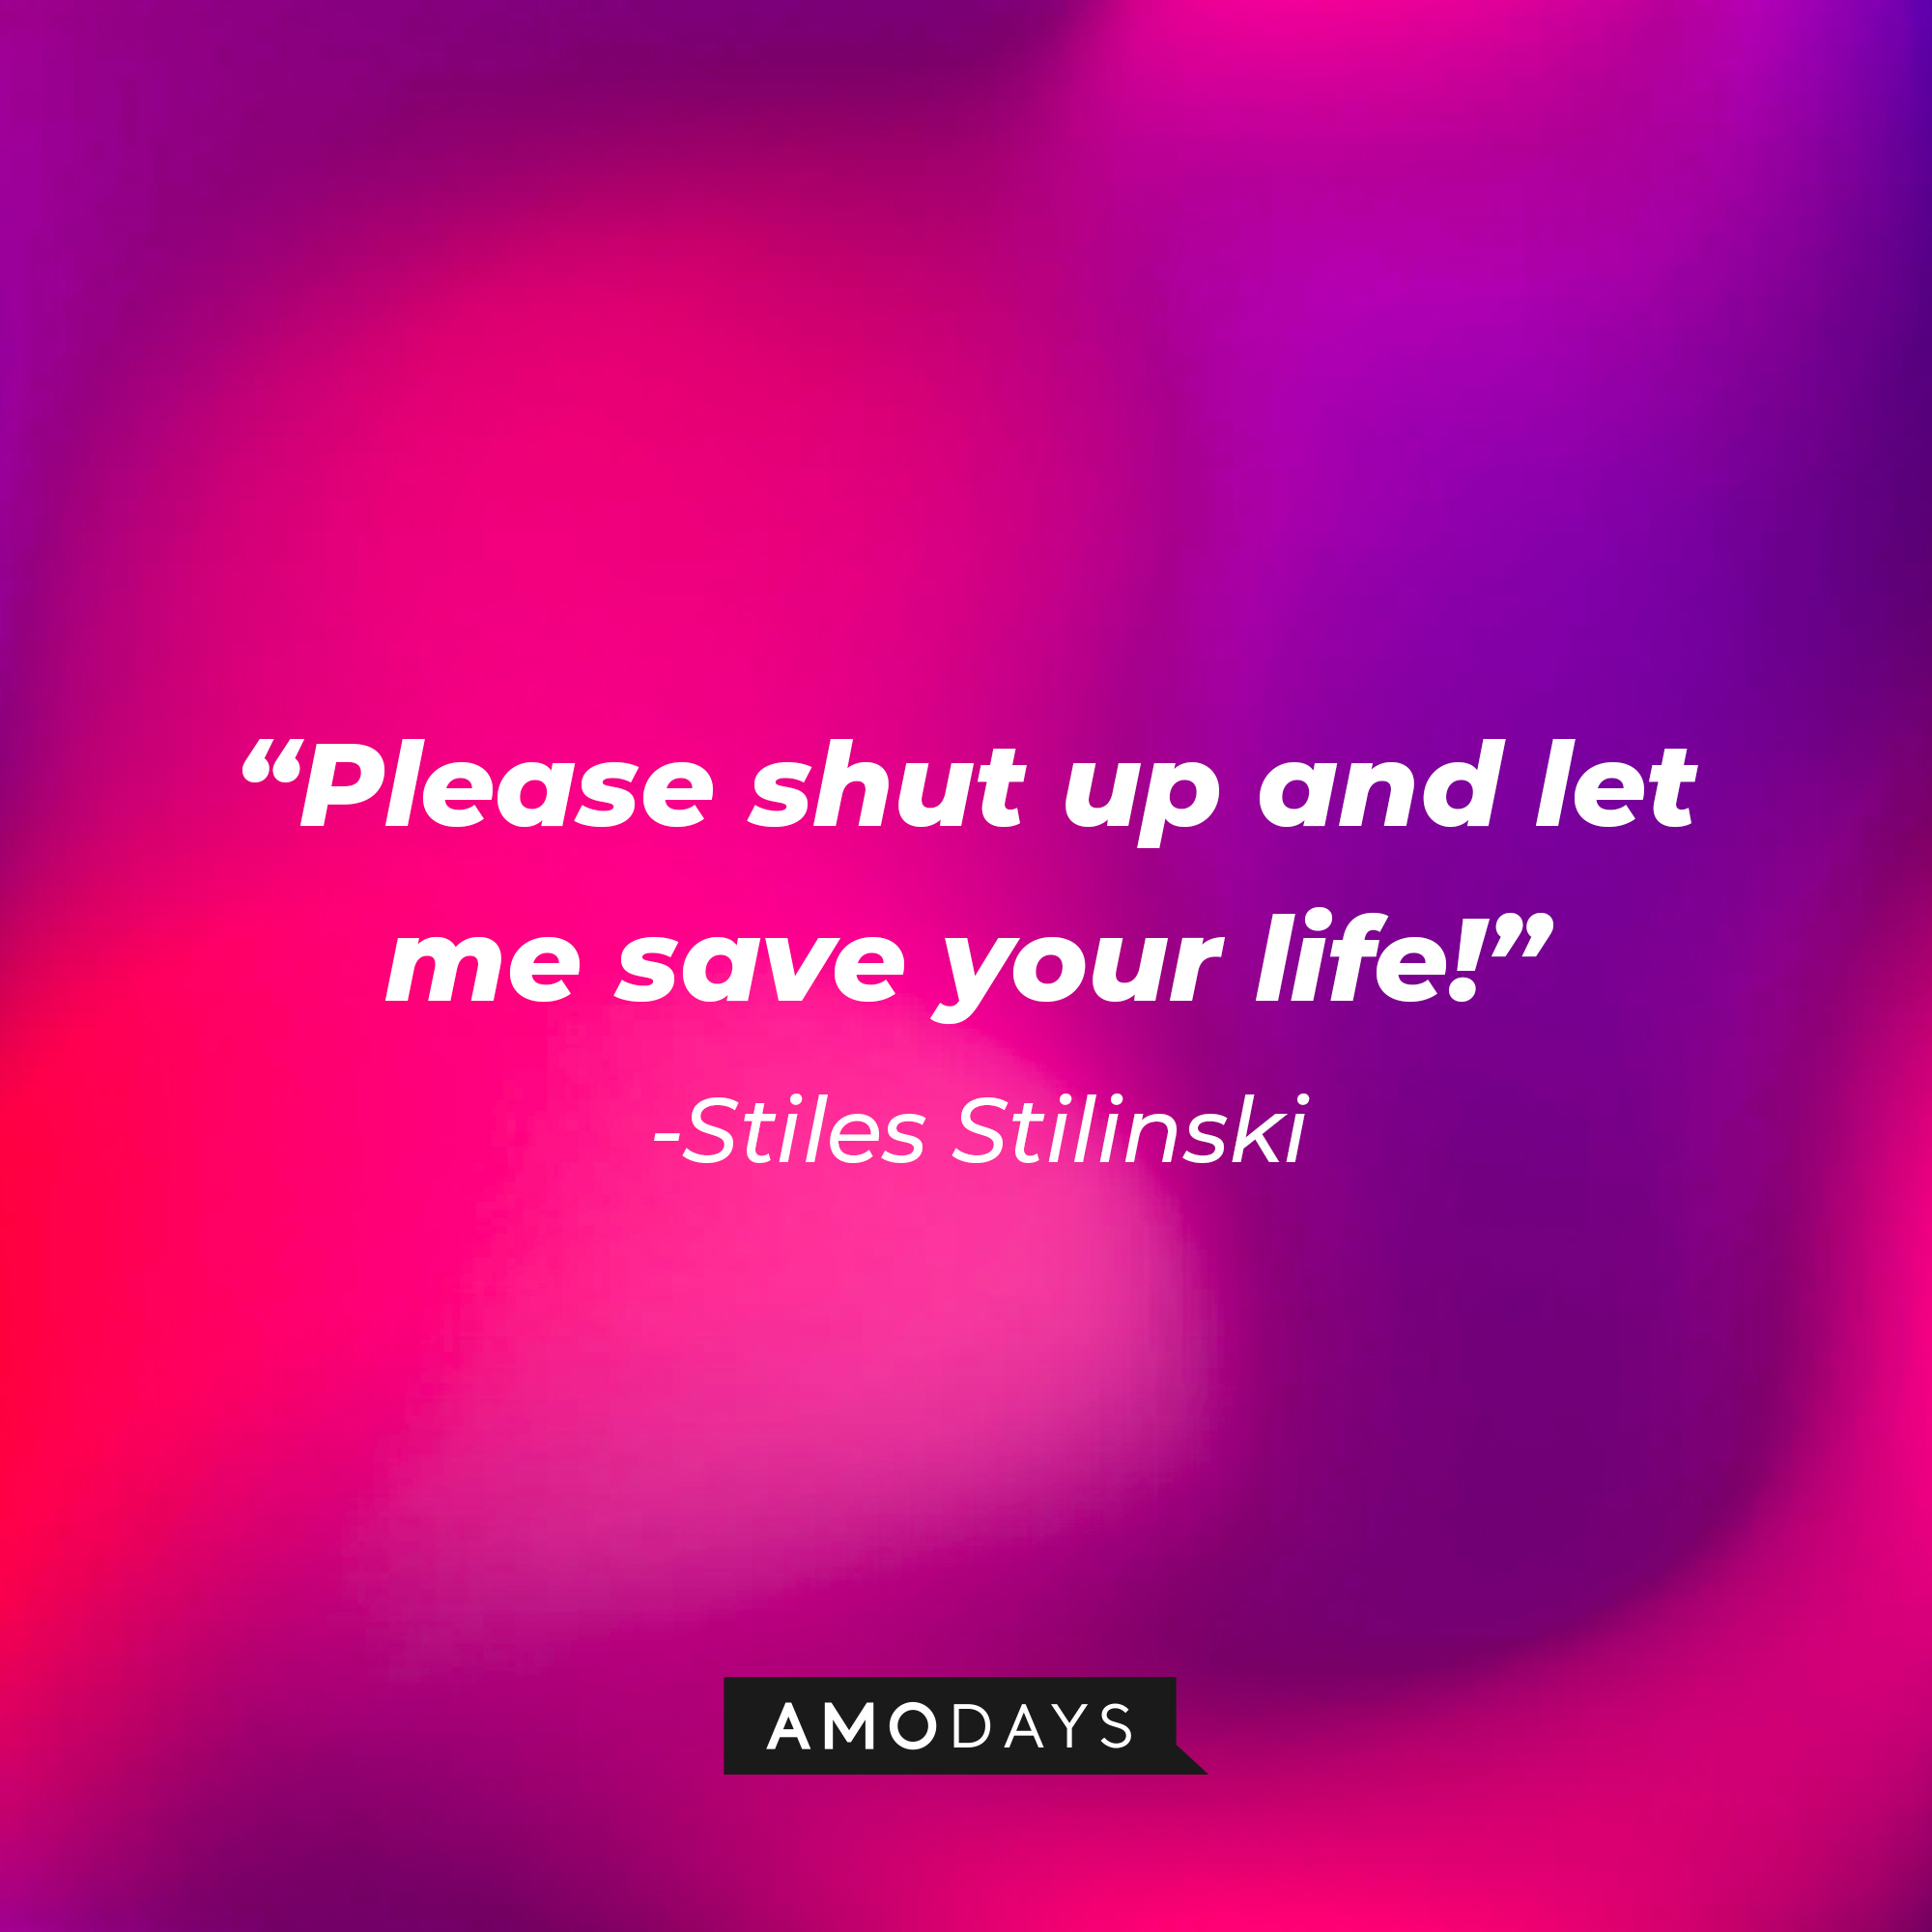 Stiles Stilinski's quote: "Please shut up and let me save your life!" | Image: AmoDays